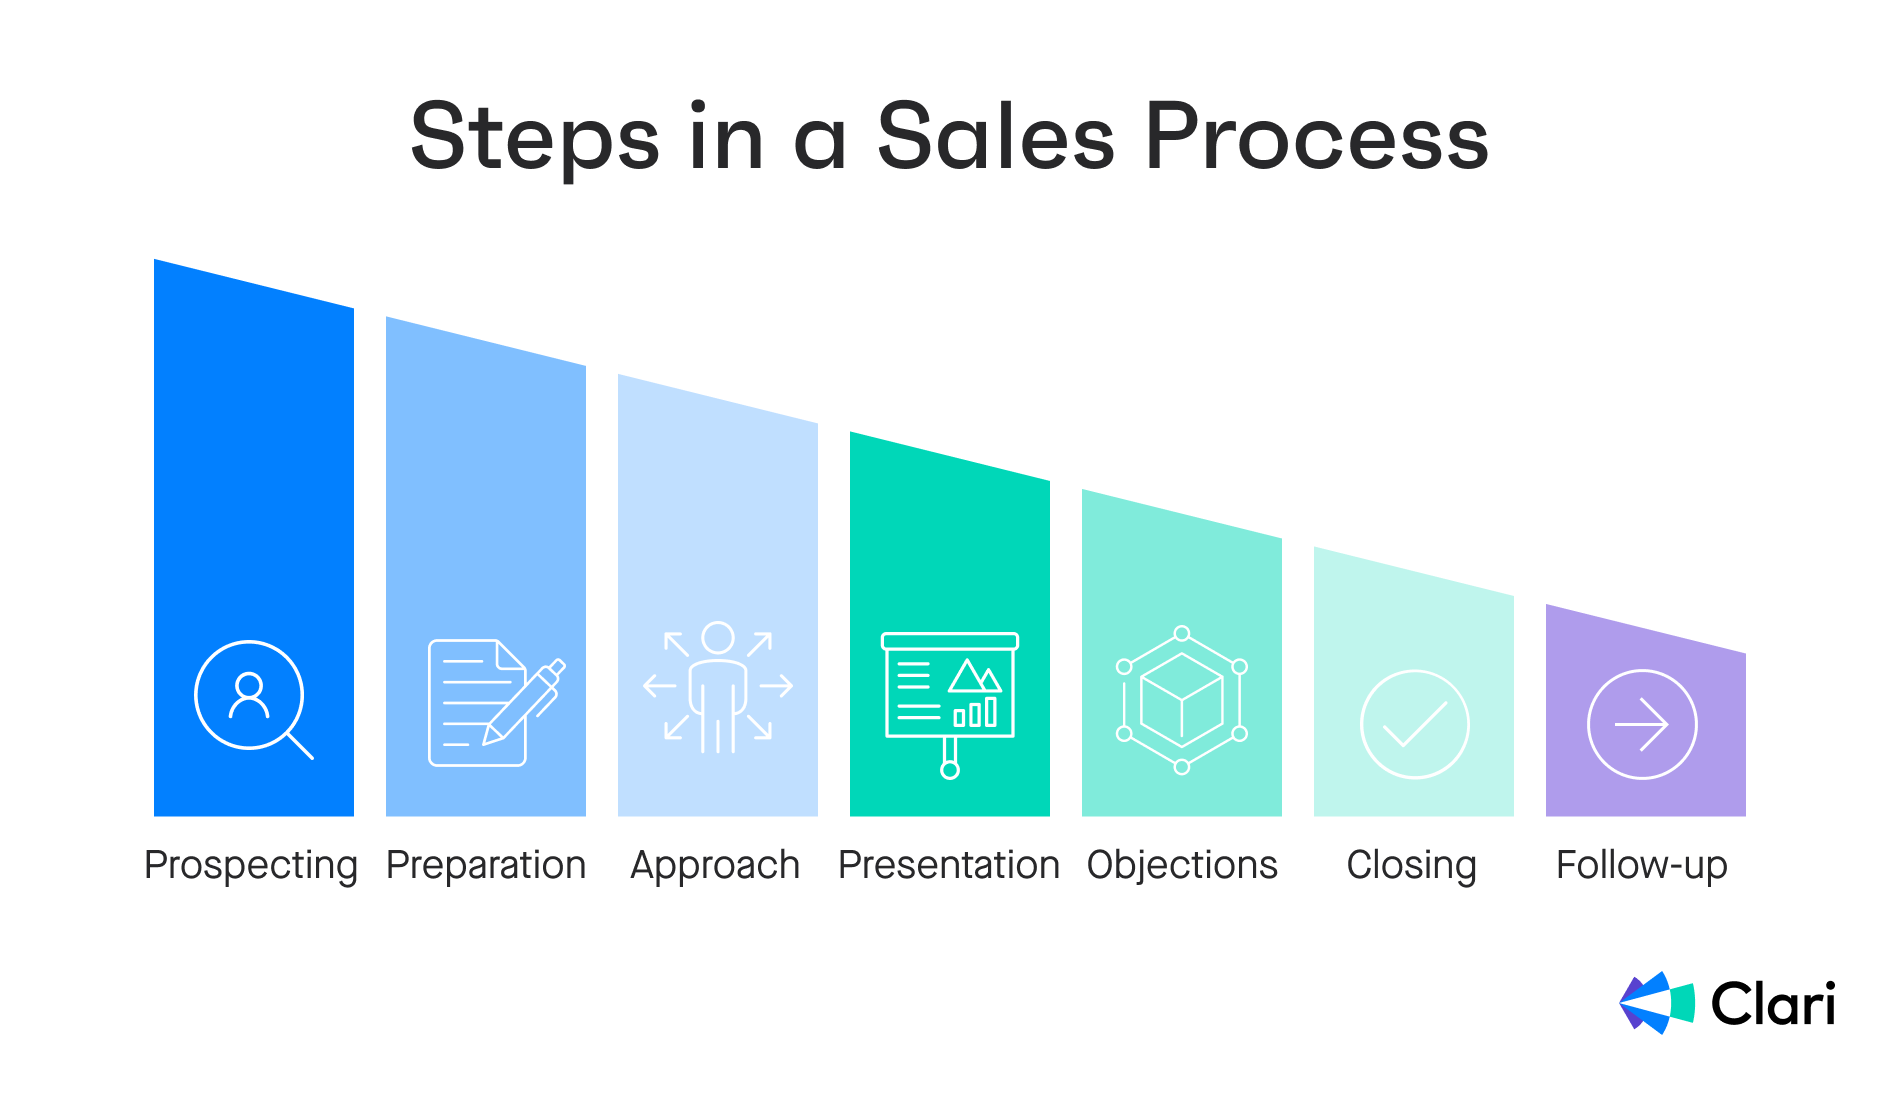 Illustration of the seven main steps in a traditional sales process